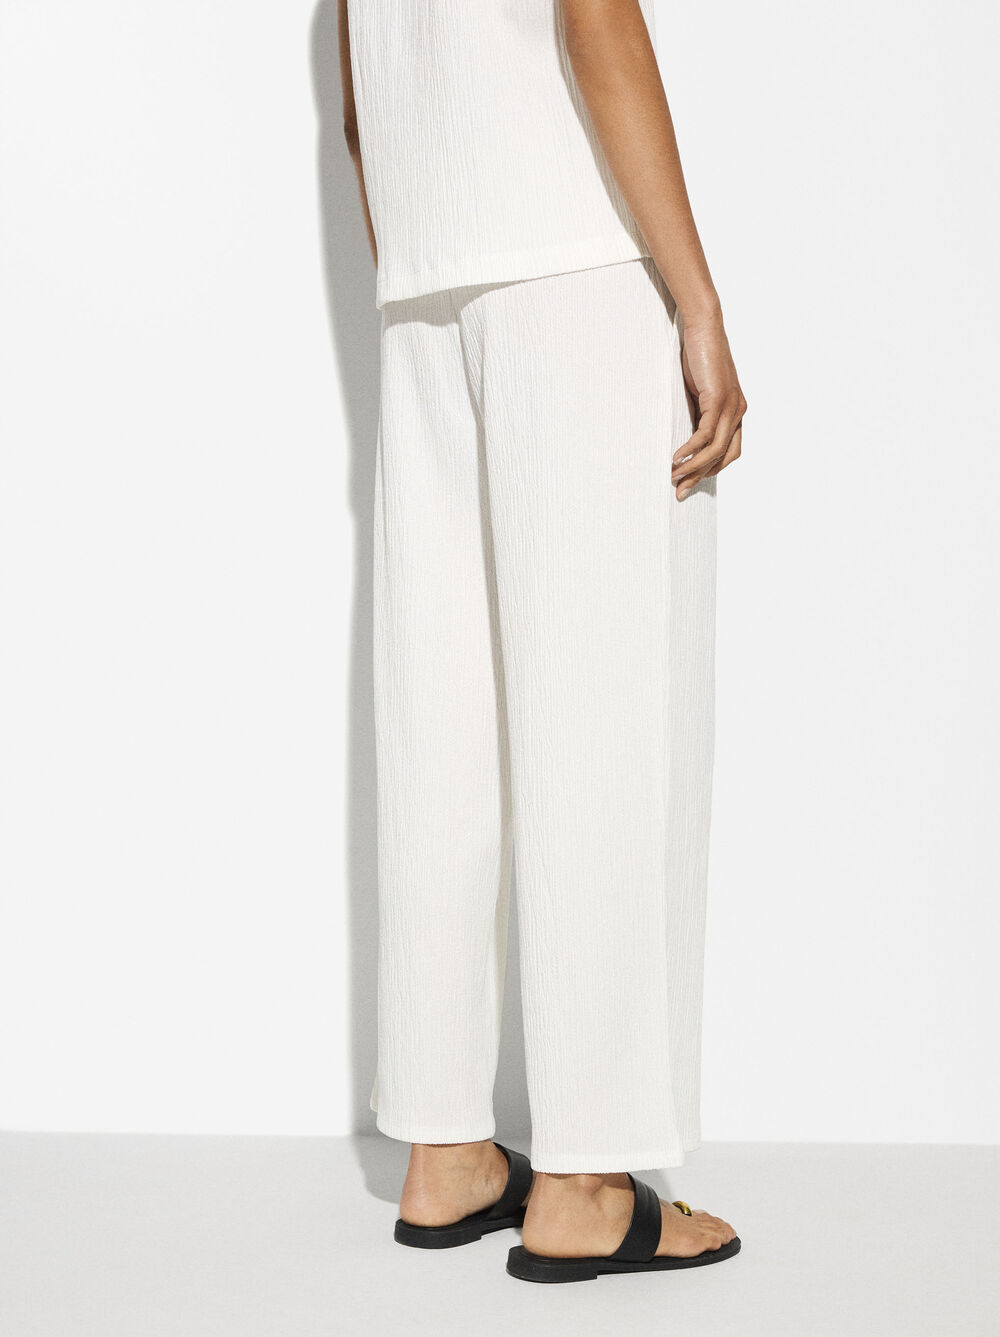 Textured Pants With Elastic Waistband image number 5.0